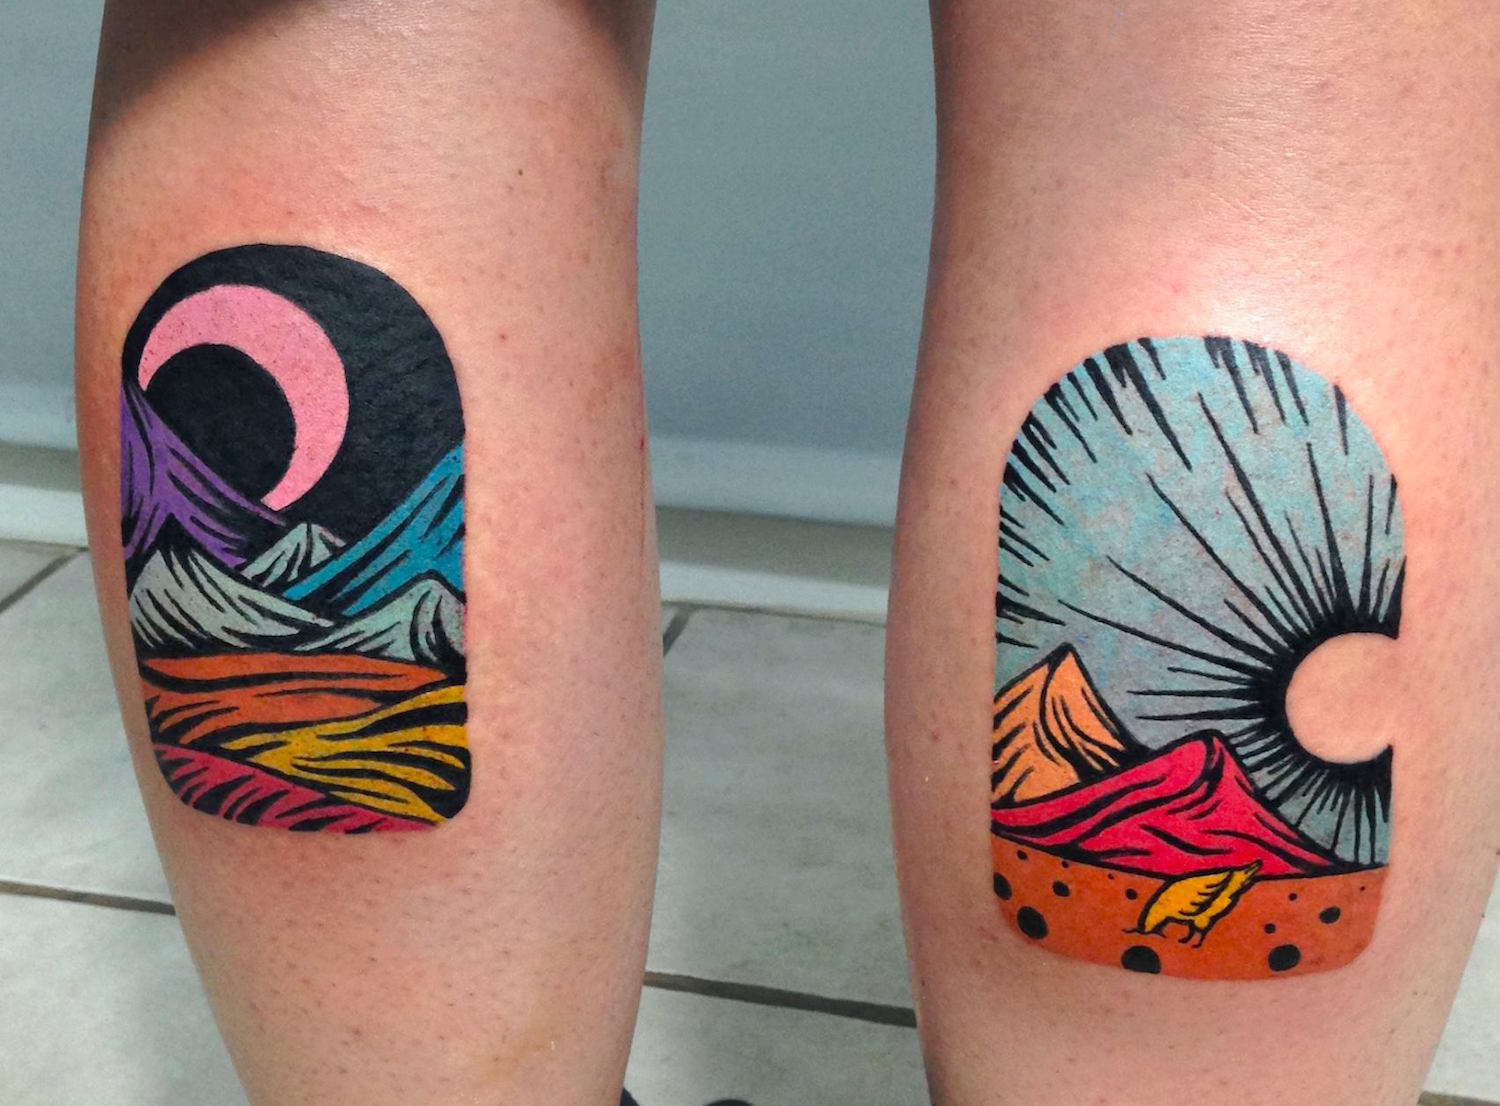 Night and day window tattoos by Dusty Past